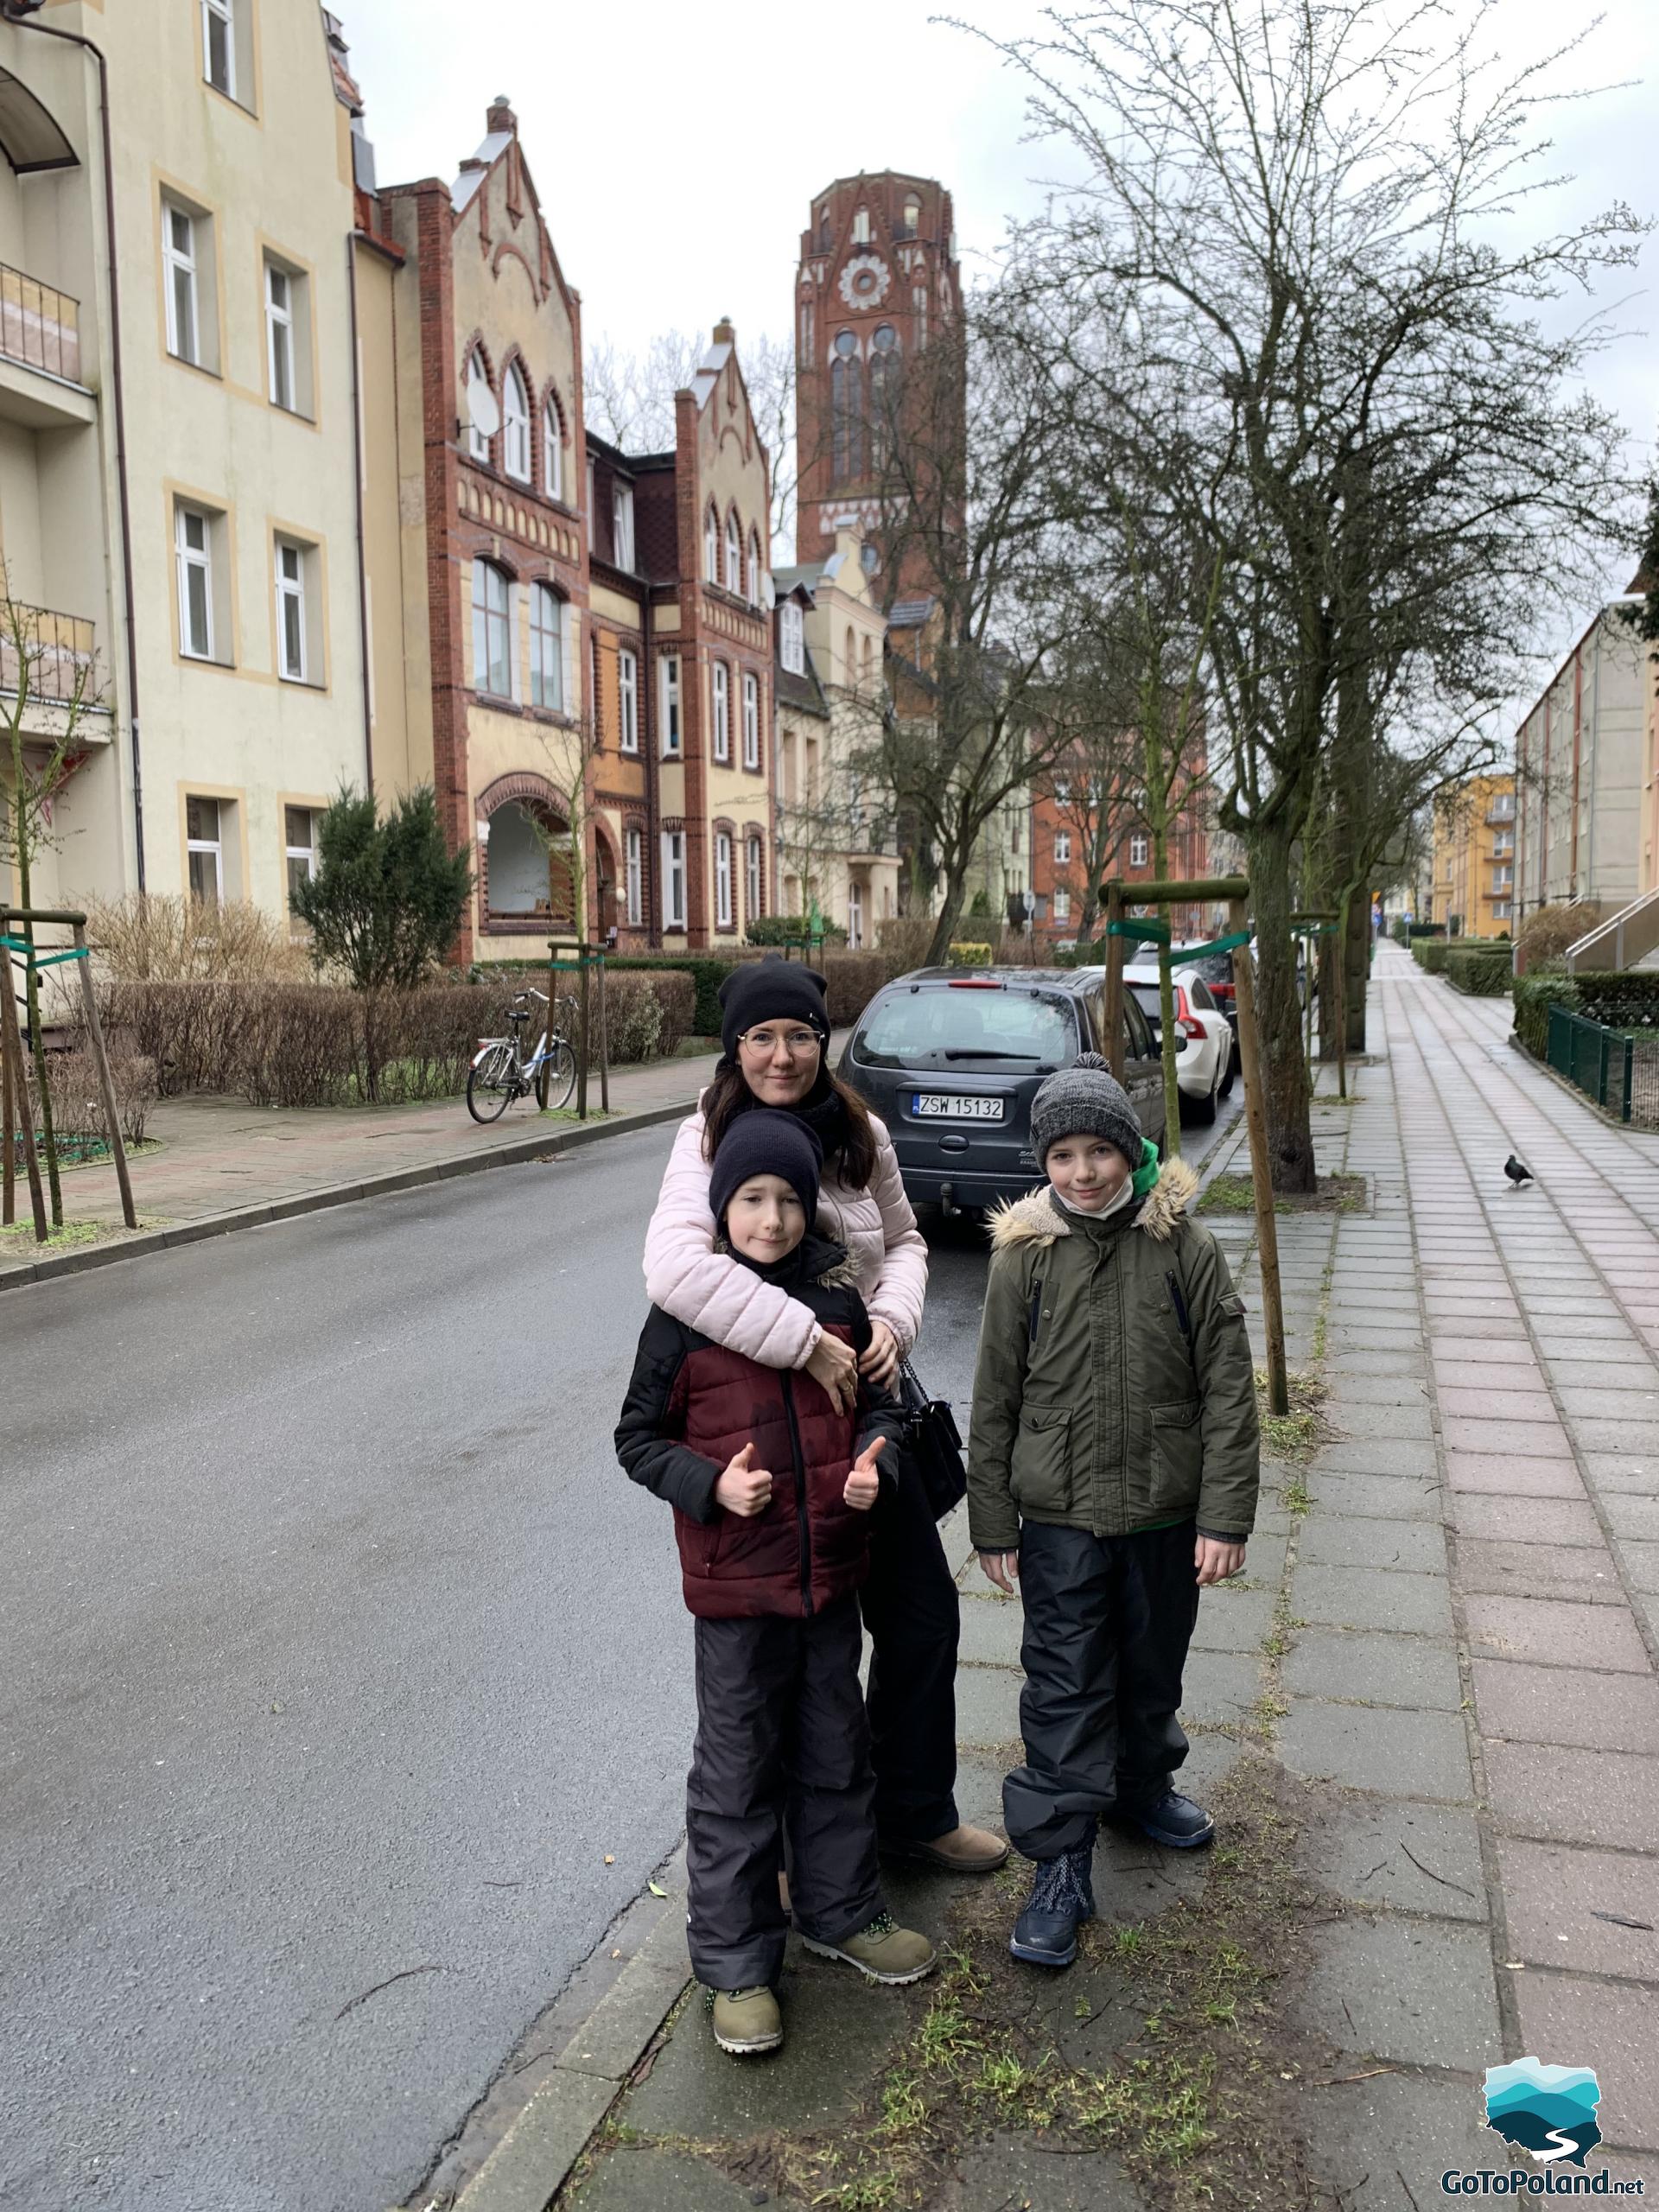 a woman and two boys are standing in the street, there are blocks of flats on both sides of the street